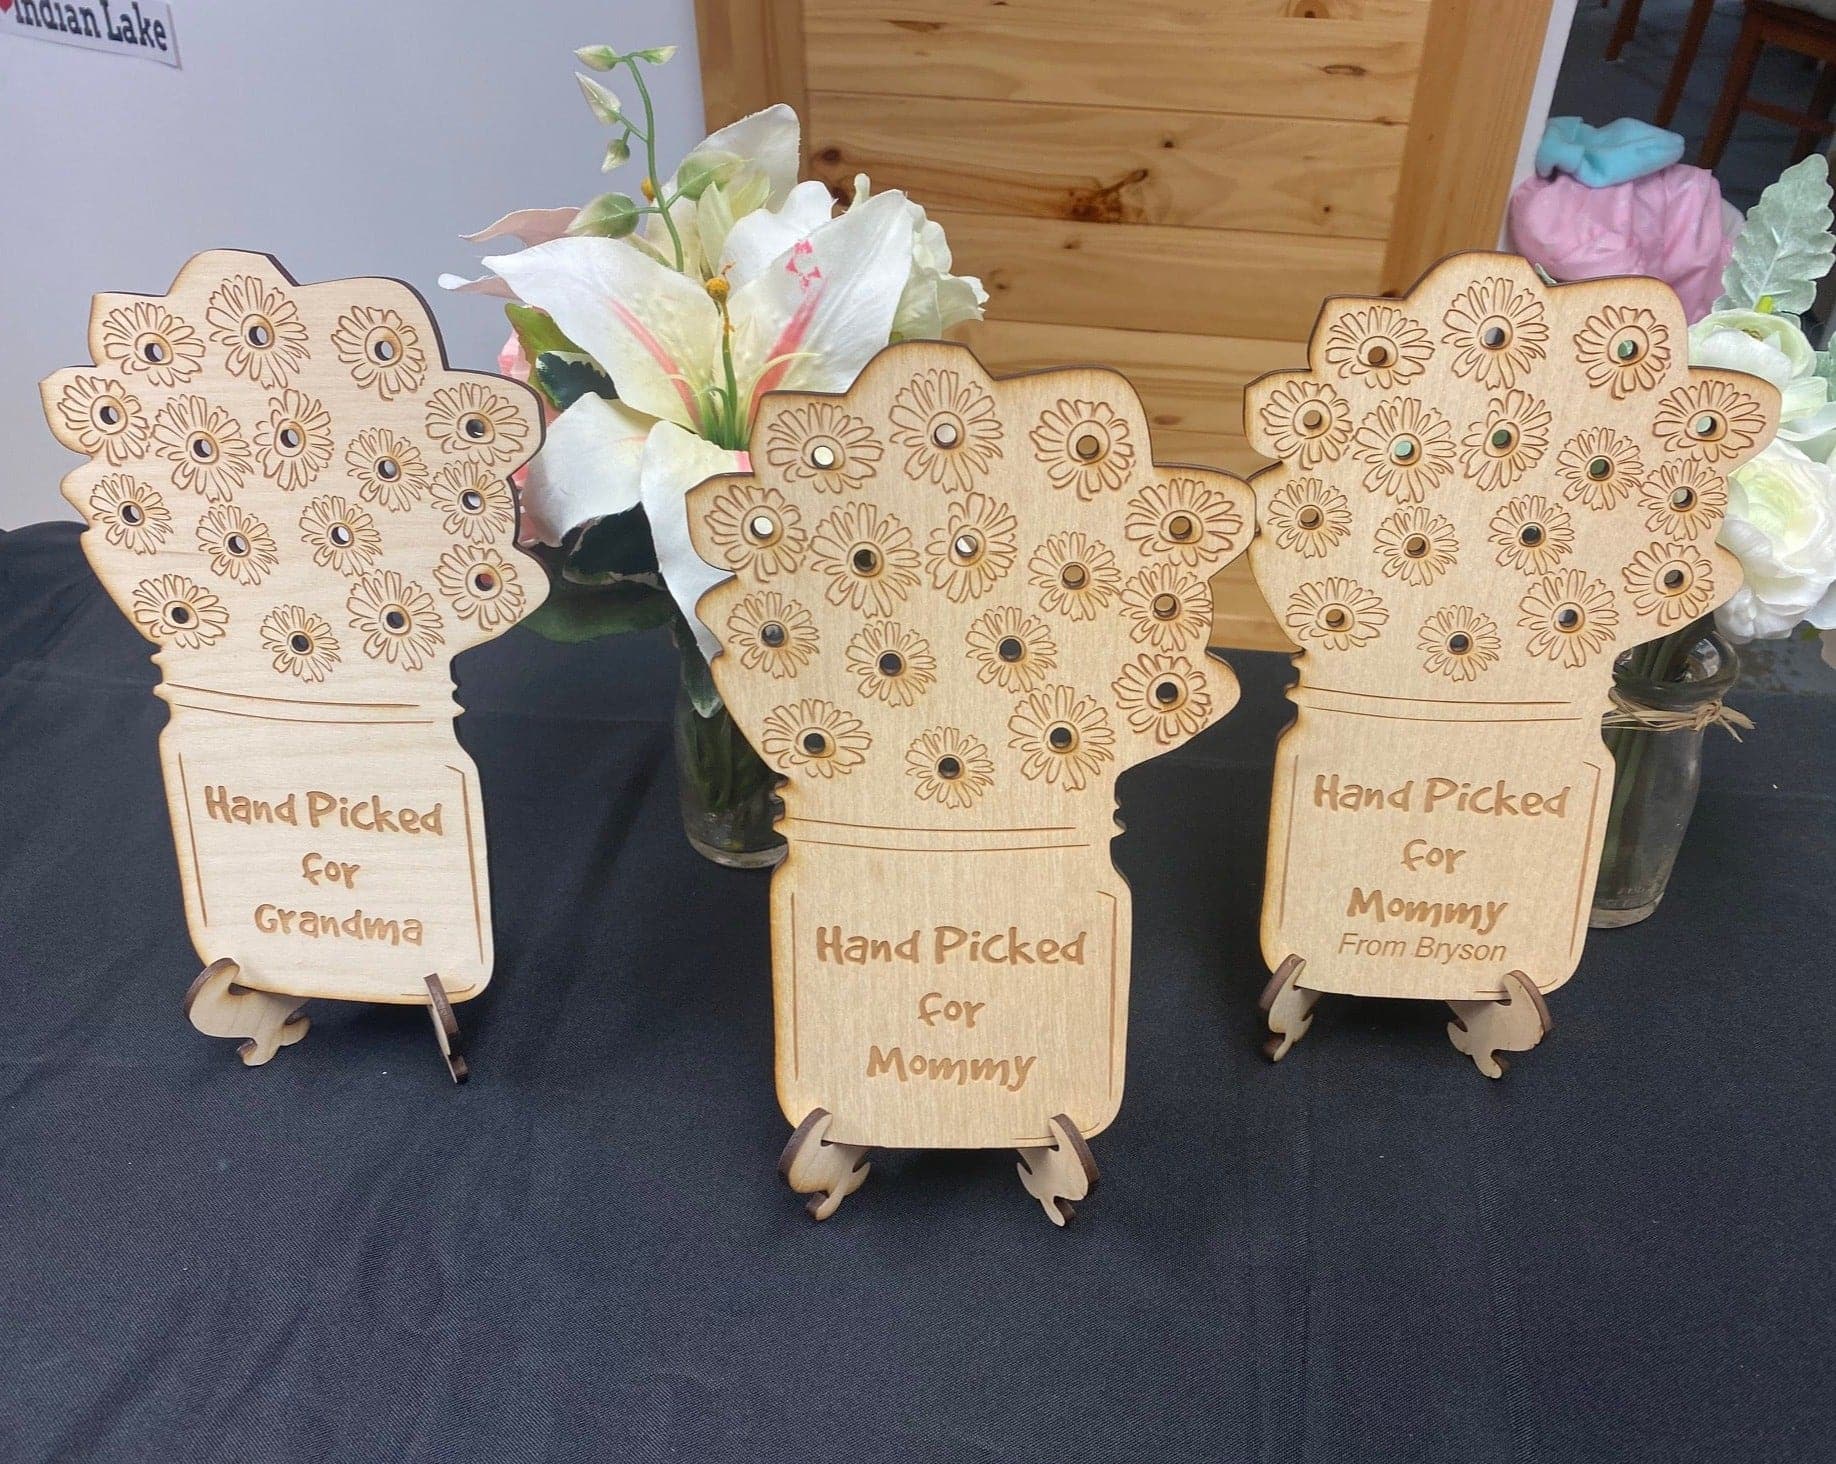 Hand Picked Flower Wooden Holder for Mommy. DANDELION Flower Holder with Stand. Grandma Flower Holder From Kids. - C & A Engraving and Gifts